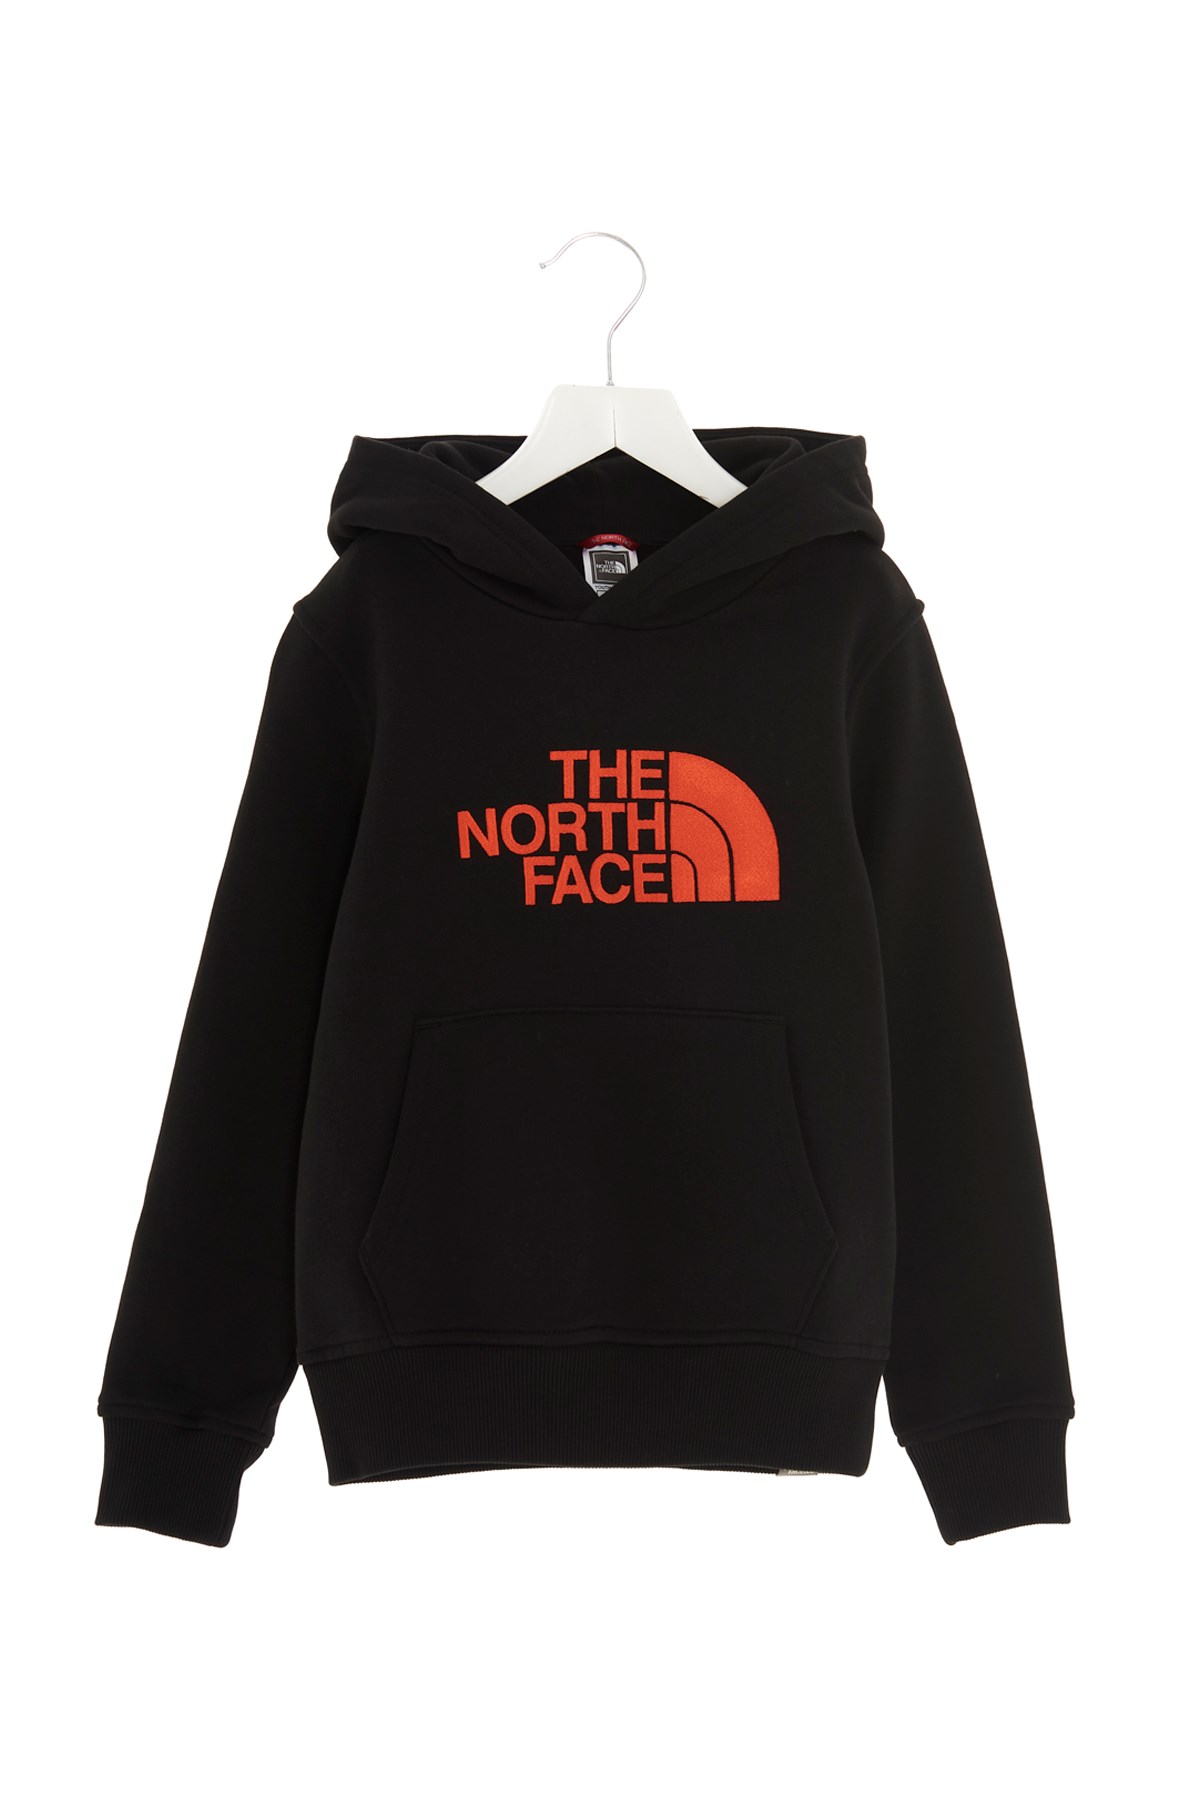 THE NORTH FACE Logo Hoodie